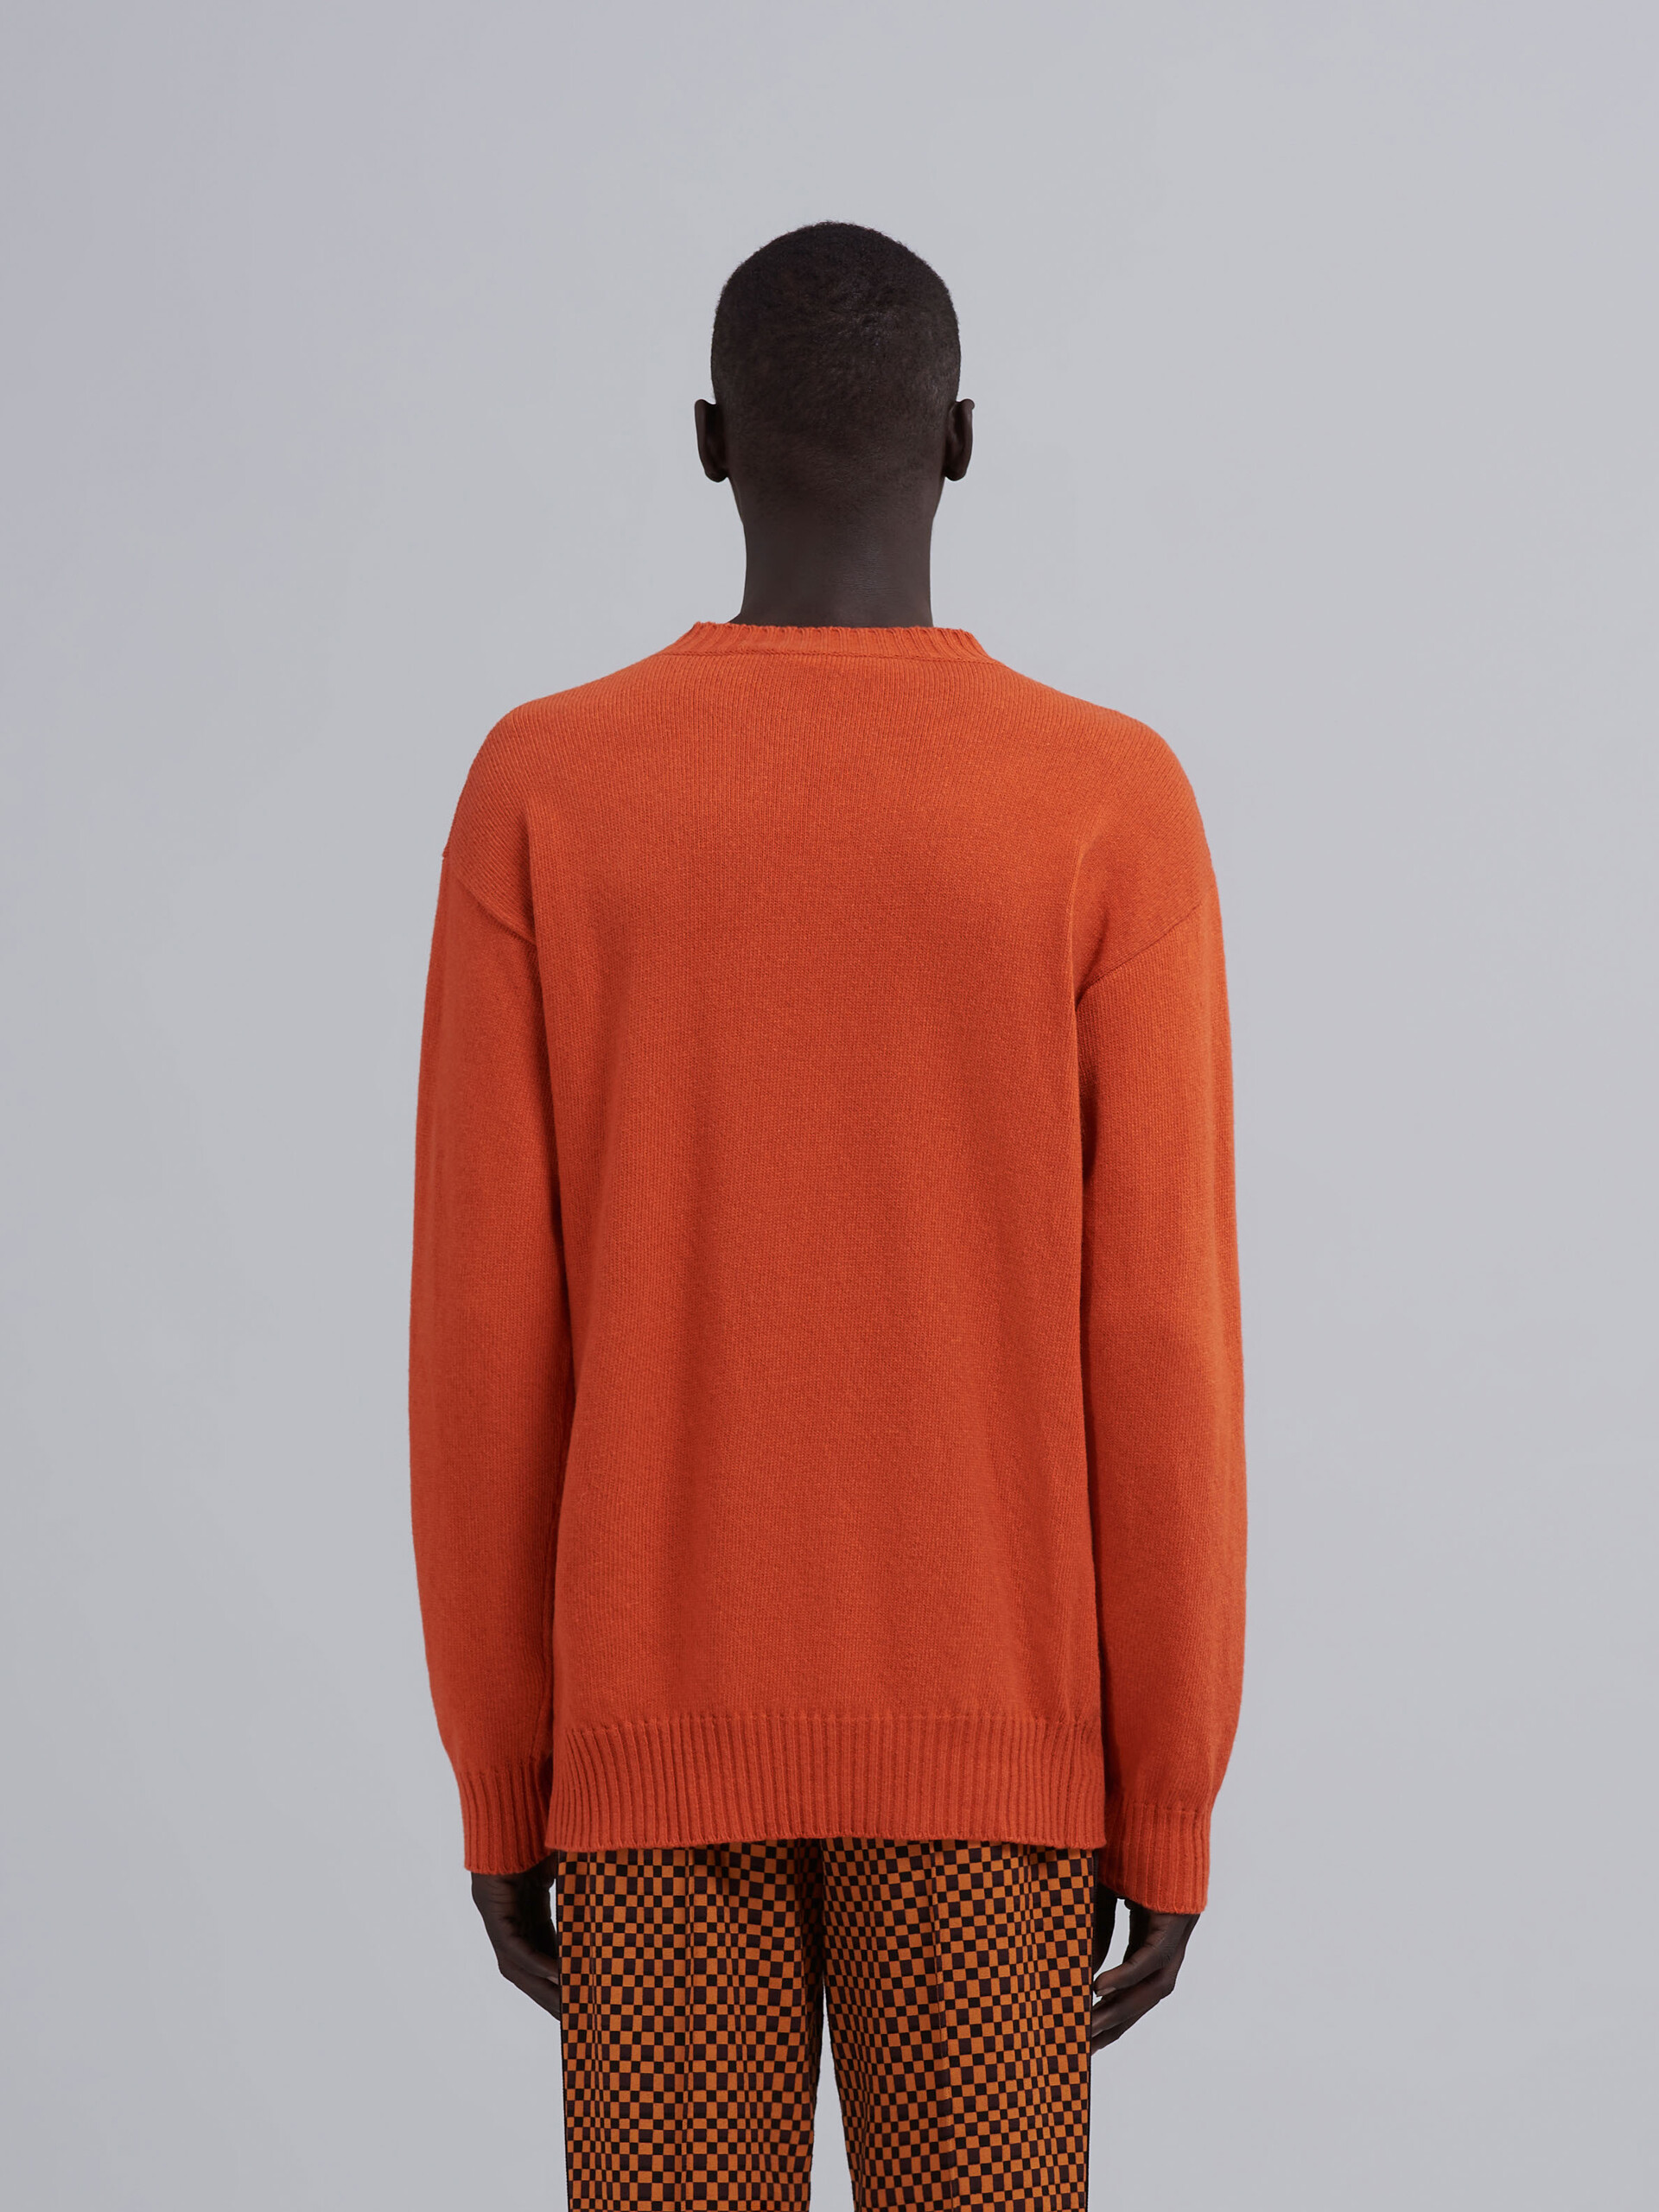 Orange recycled cashmere sweater - Pullovers - Image 3